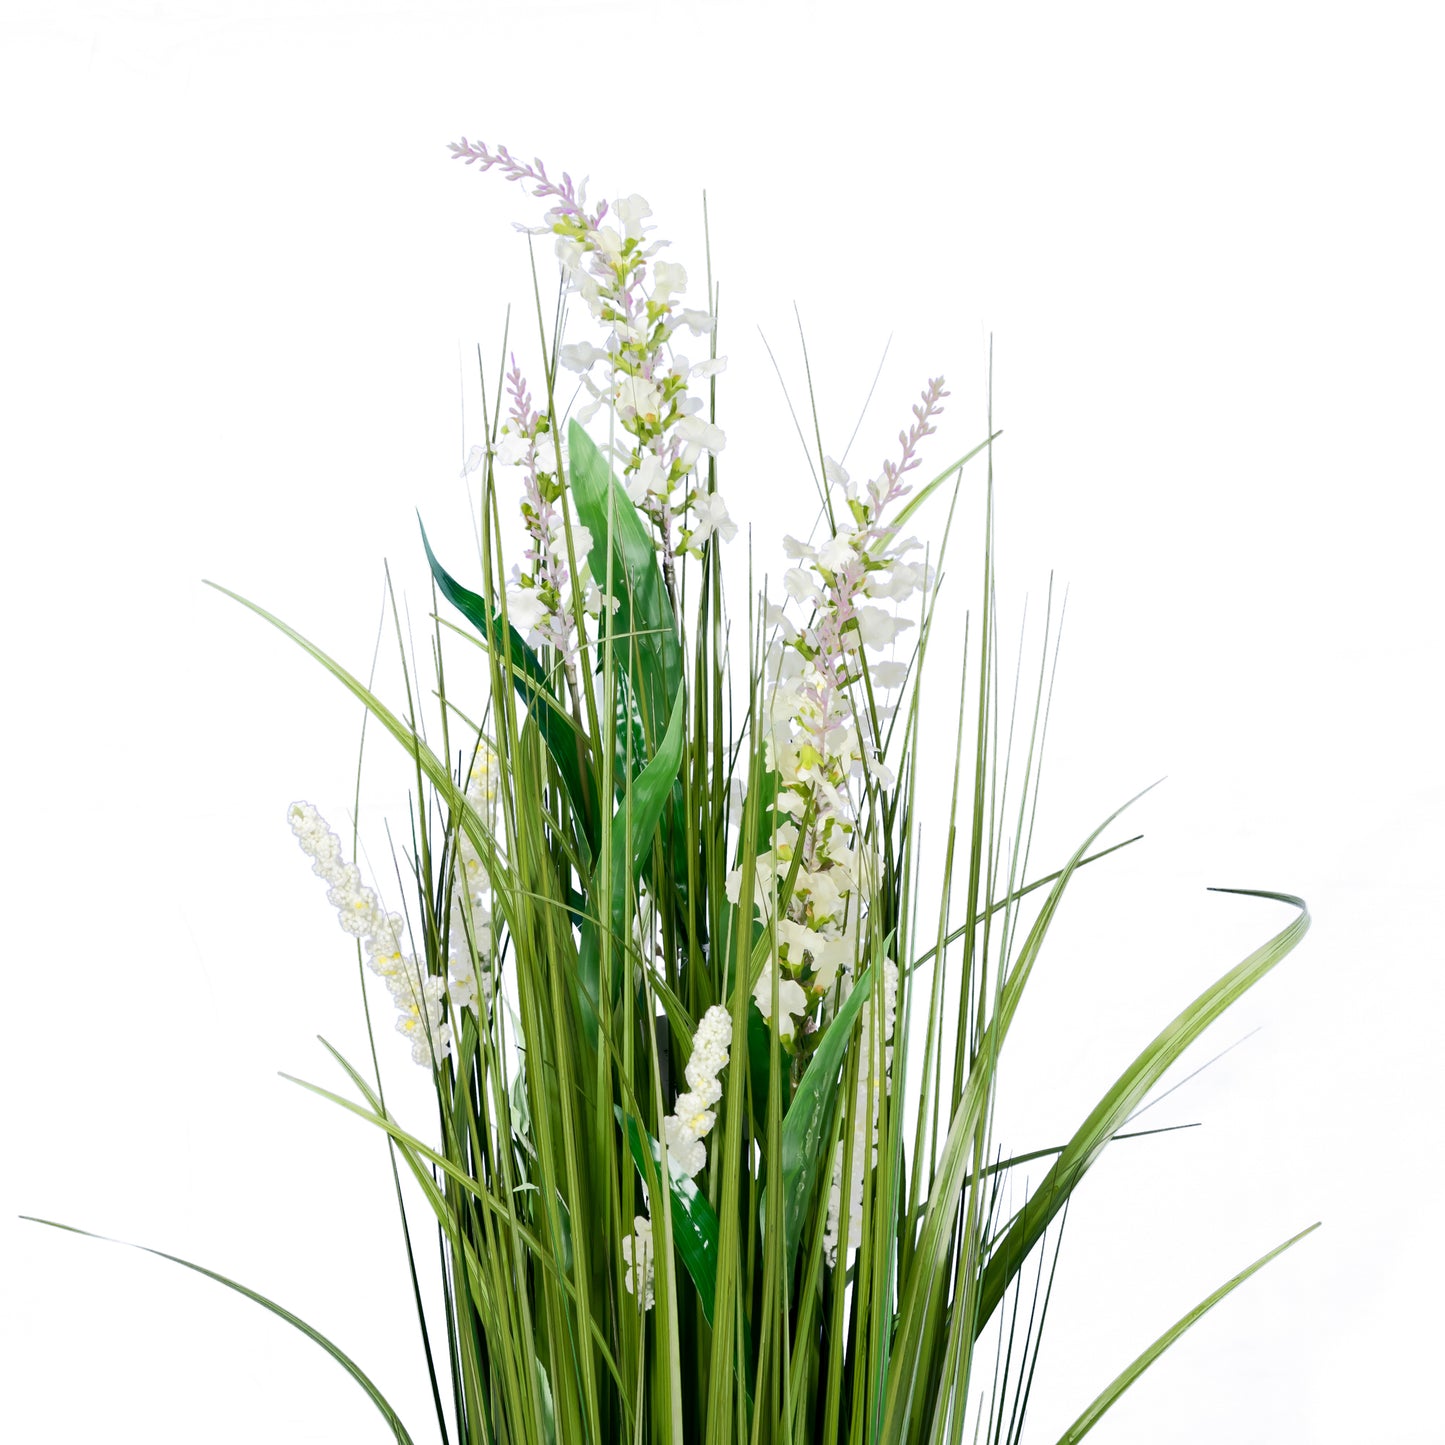 3 Feet High Artificial Reed with White Snapdragon Similar Flowers